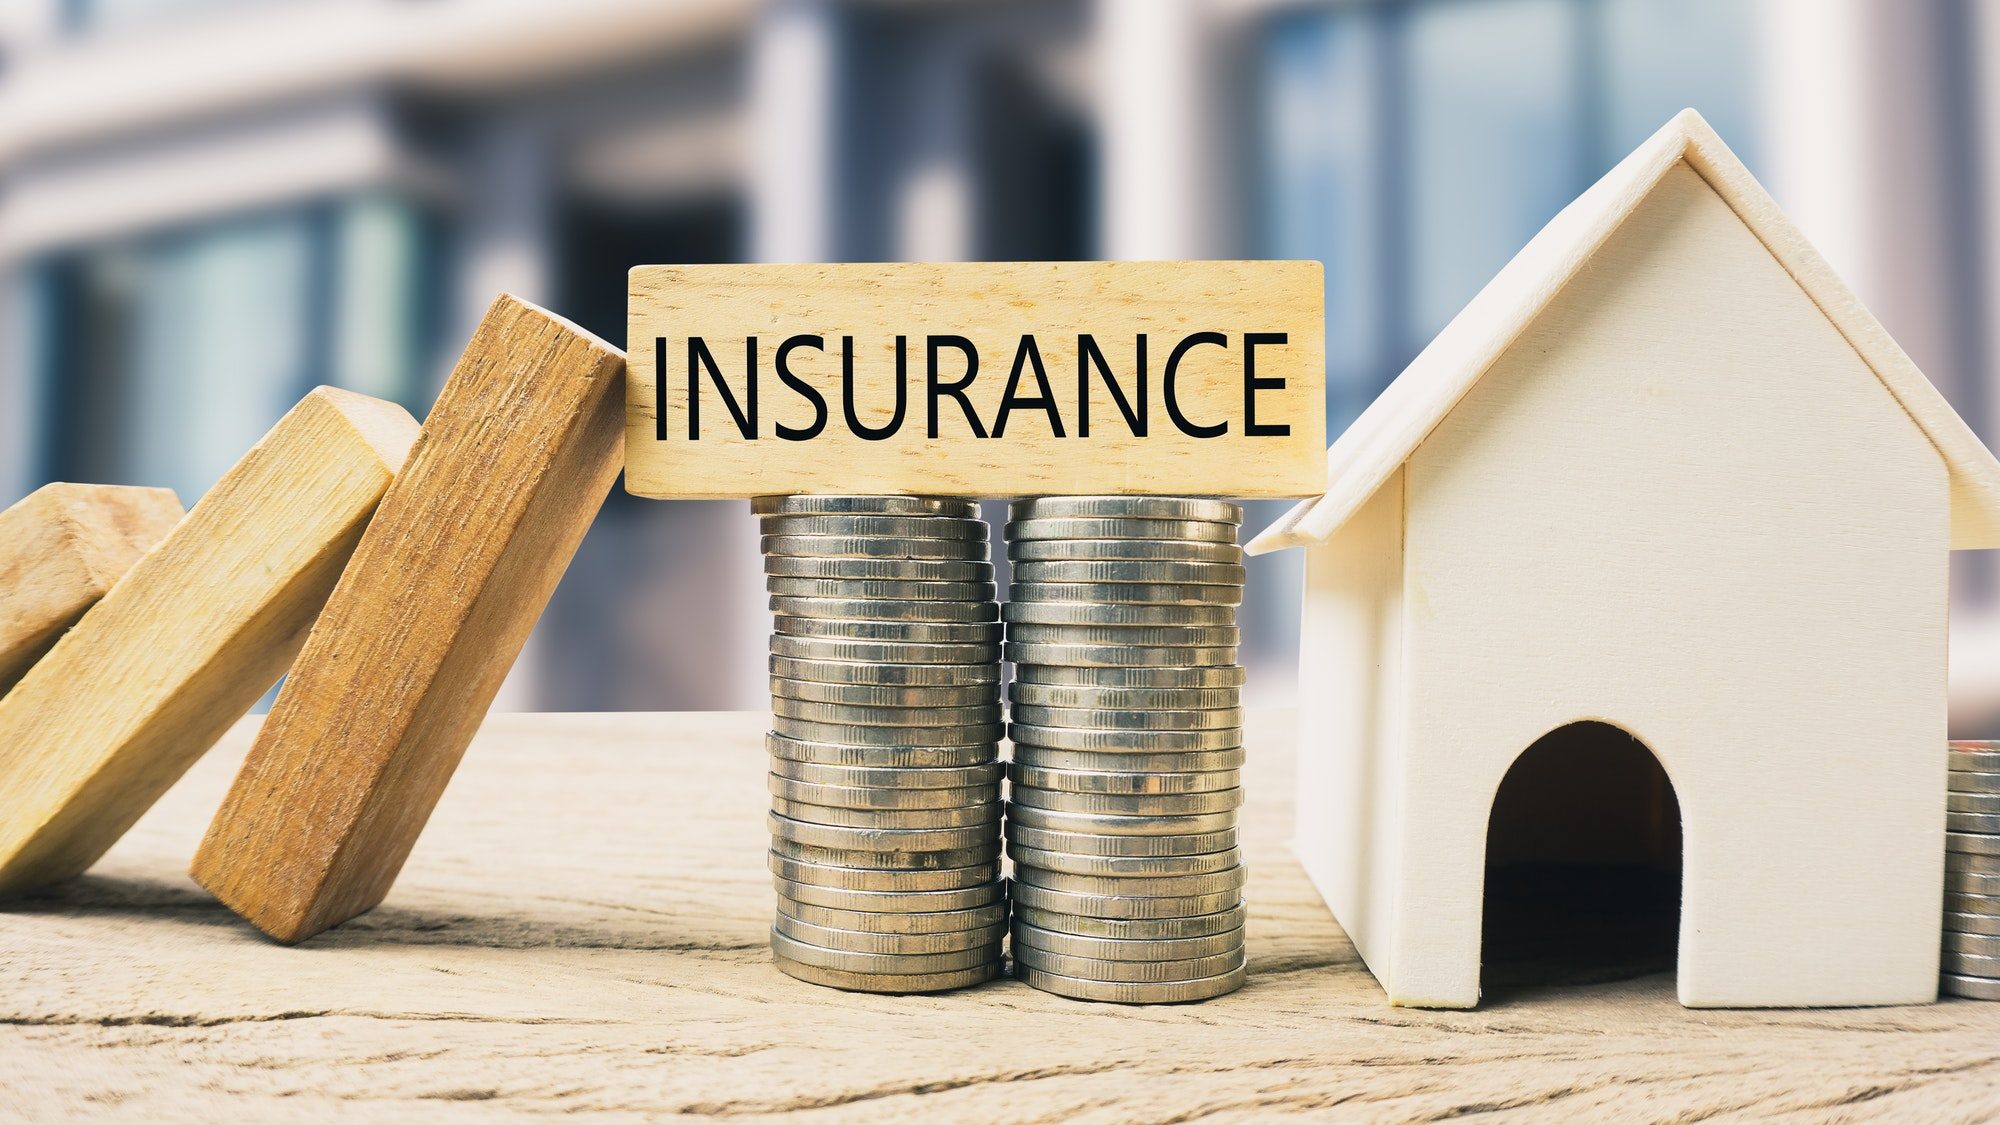 Home or real estate insurance protection concept